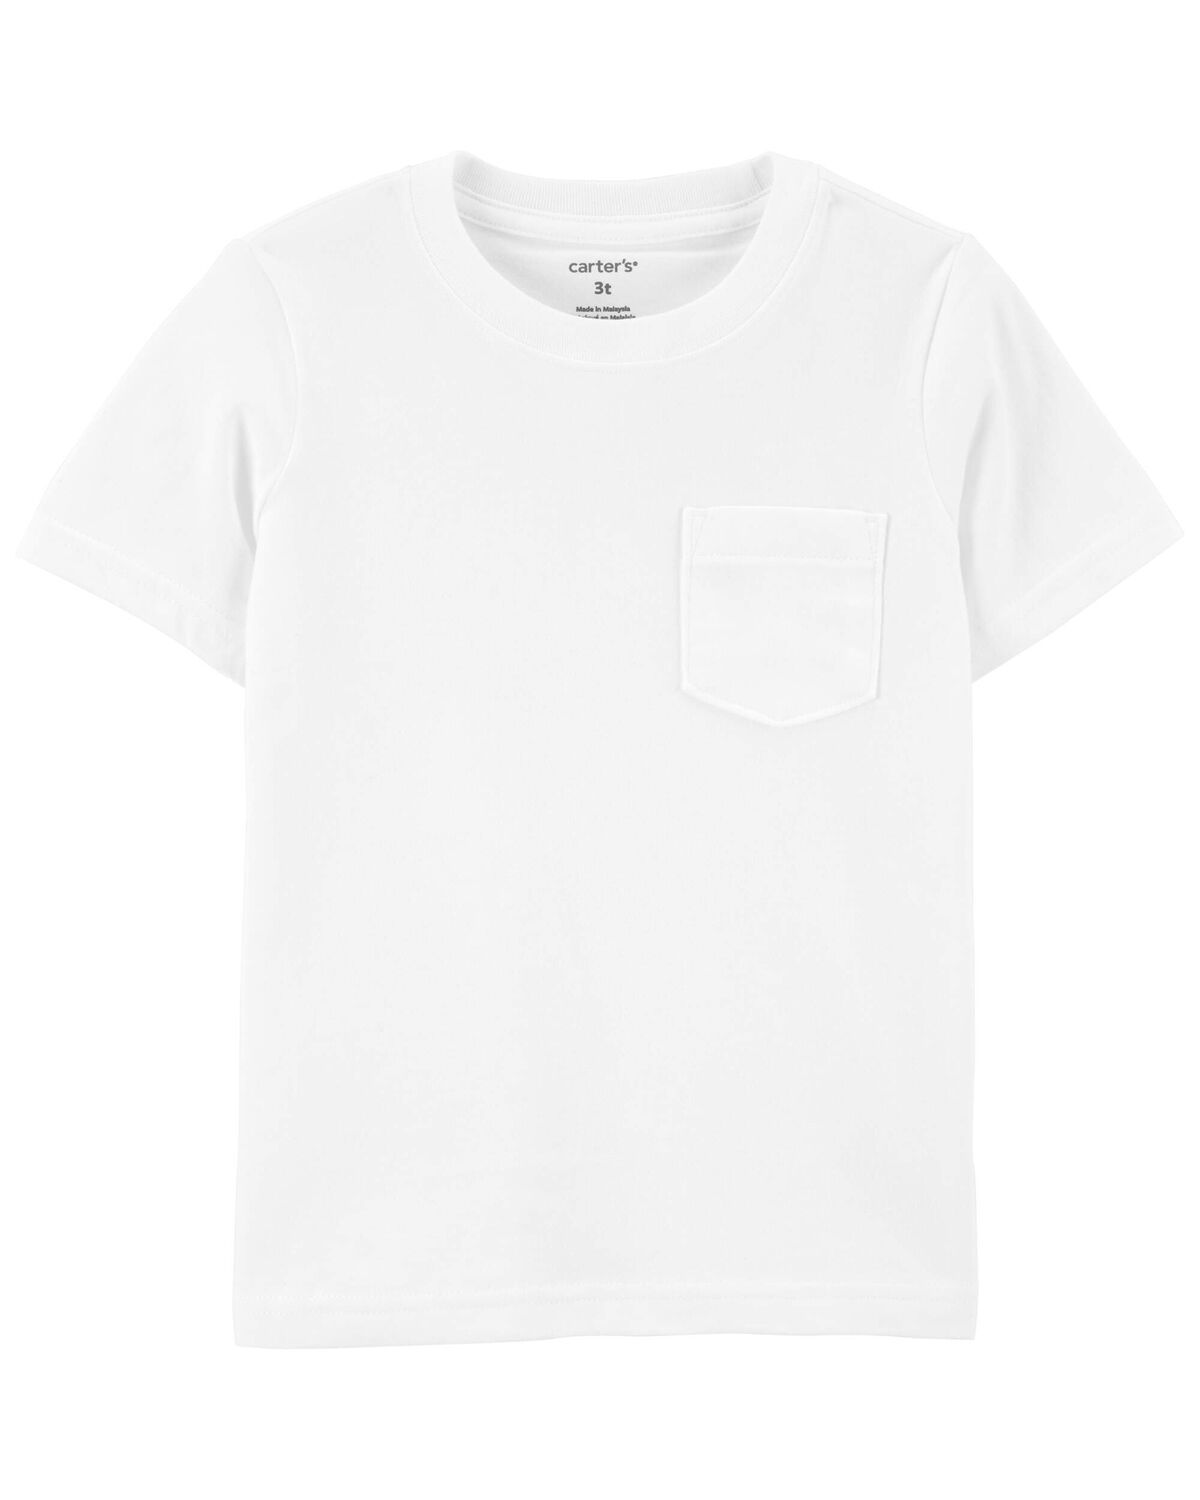 White Baby Pocket Jersey Tee | carters.com | Carter's